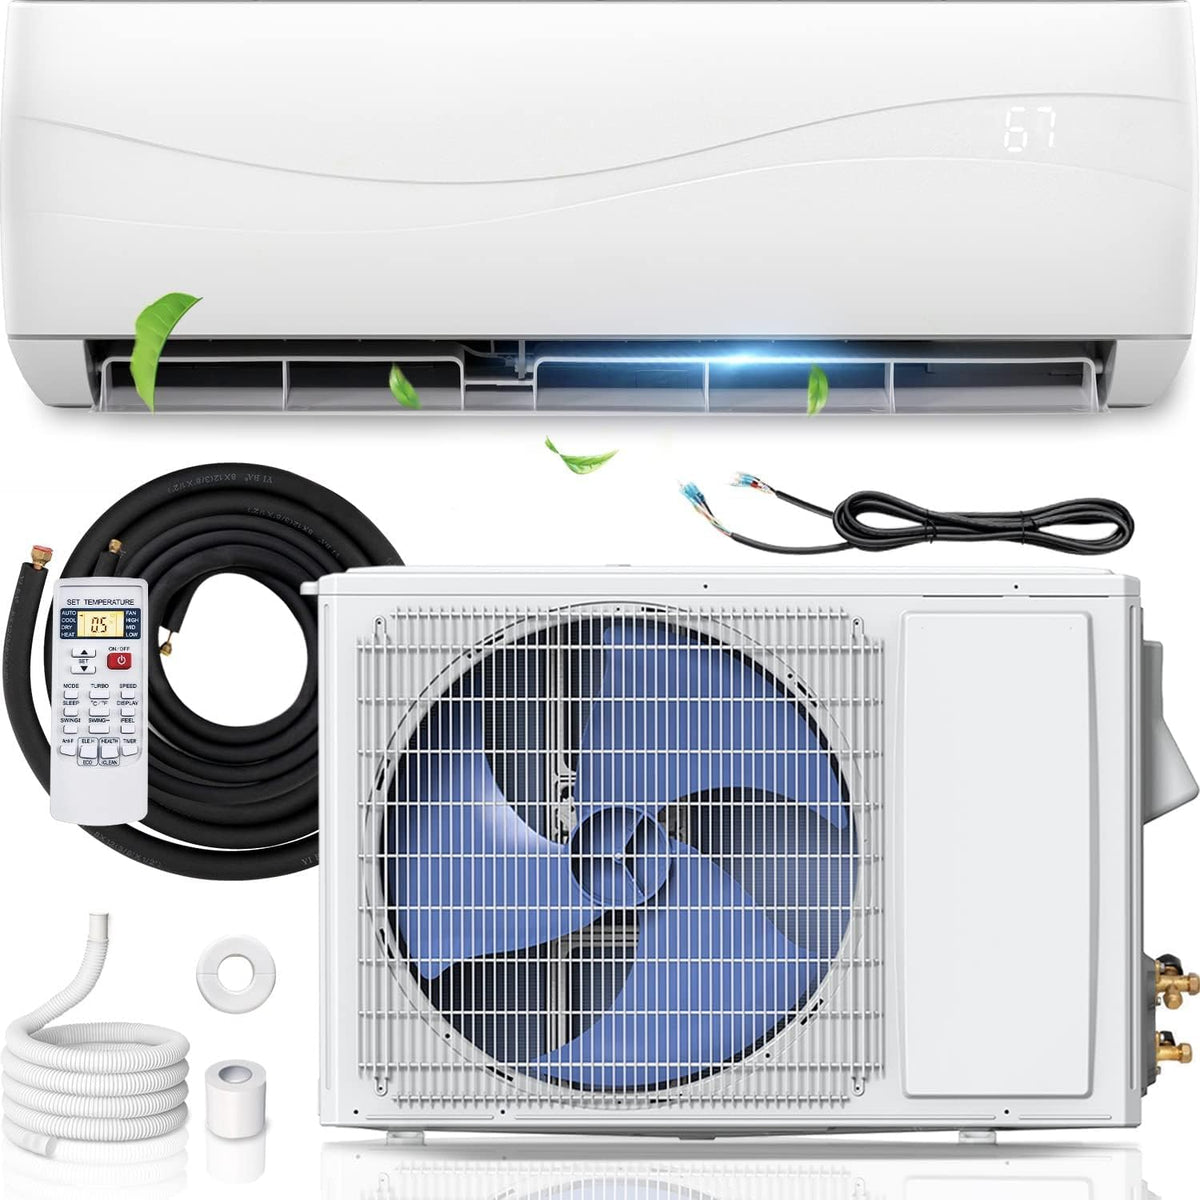 9000 BTU 17 SEER2 Mini Split Air Conditioner & Heater Ductless Inverter System, 208-230V Wall-Mounted AC Unit with Heat Pump